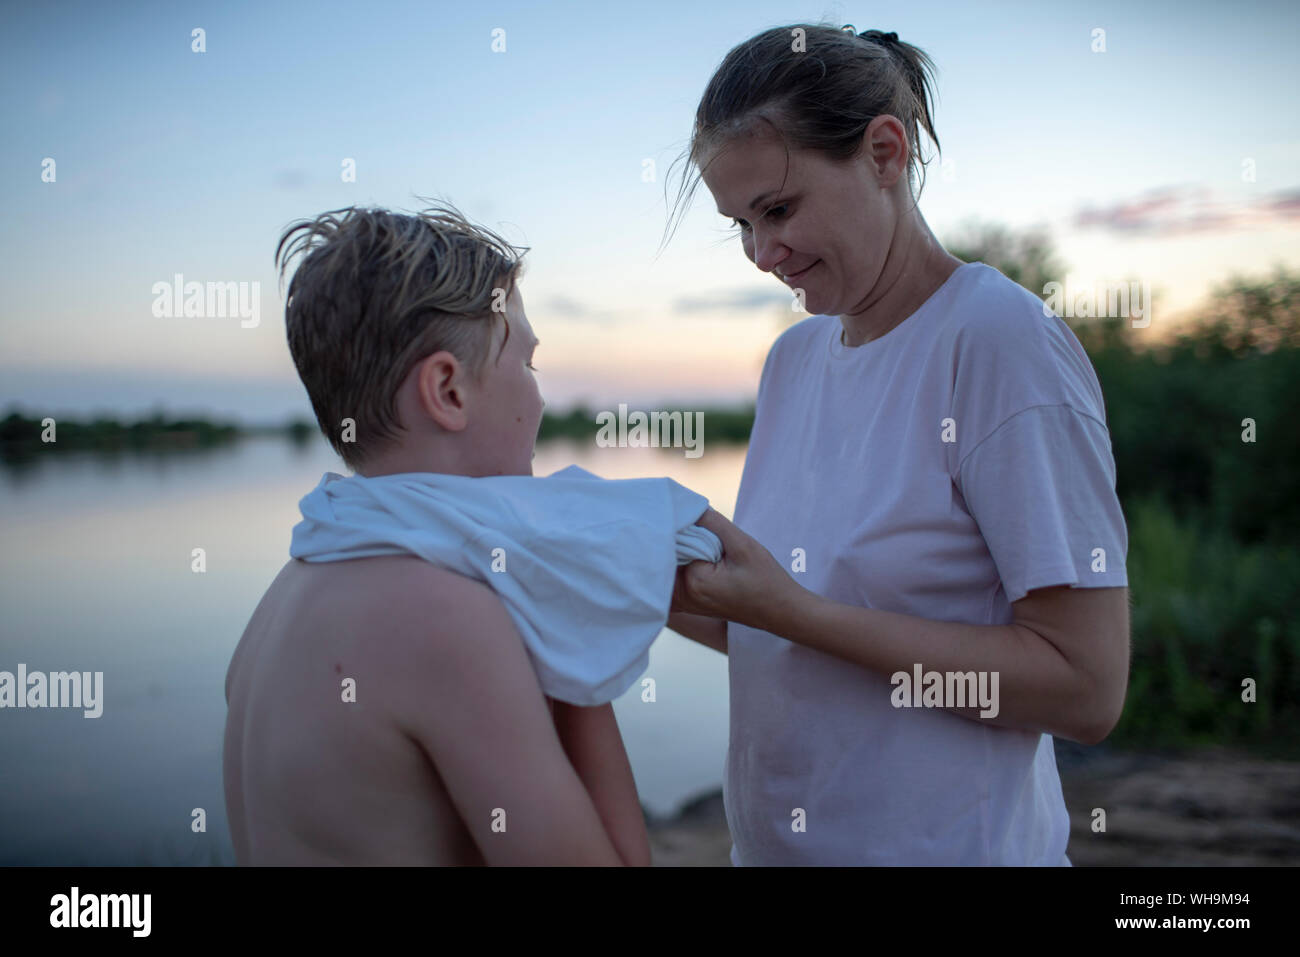 Mother caring for son at a lakeshore at sunset Stock Photo